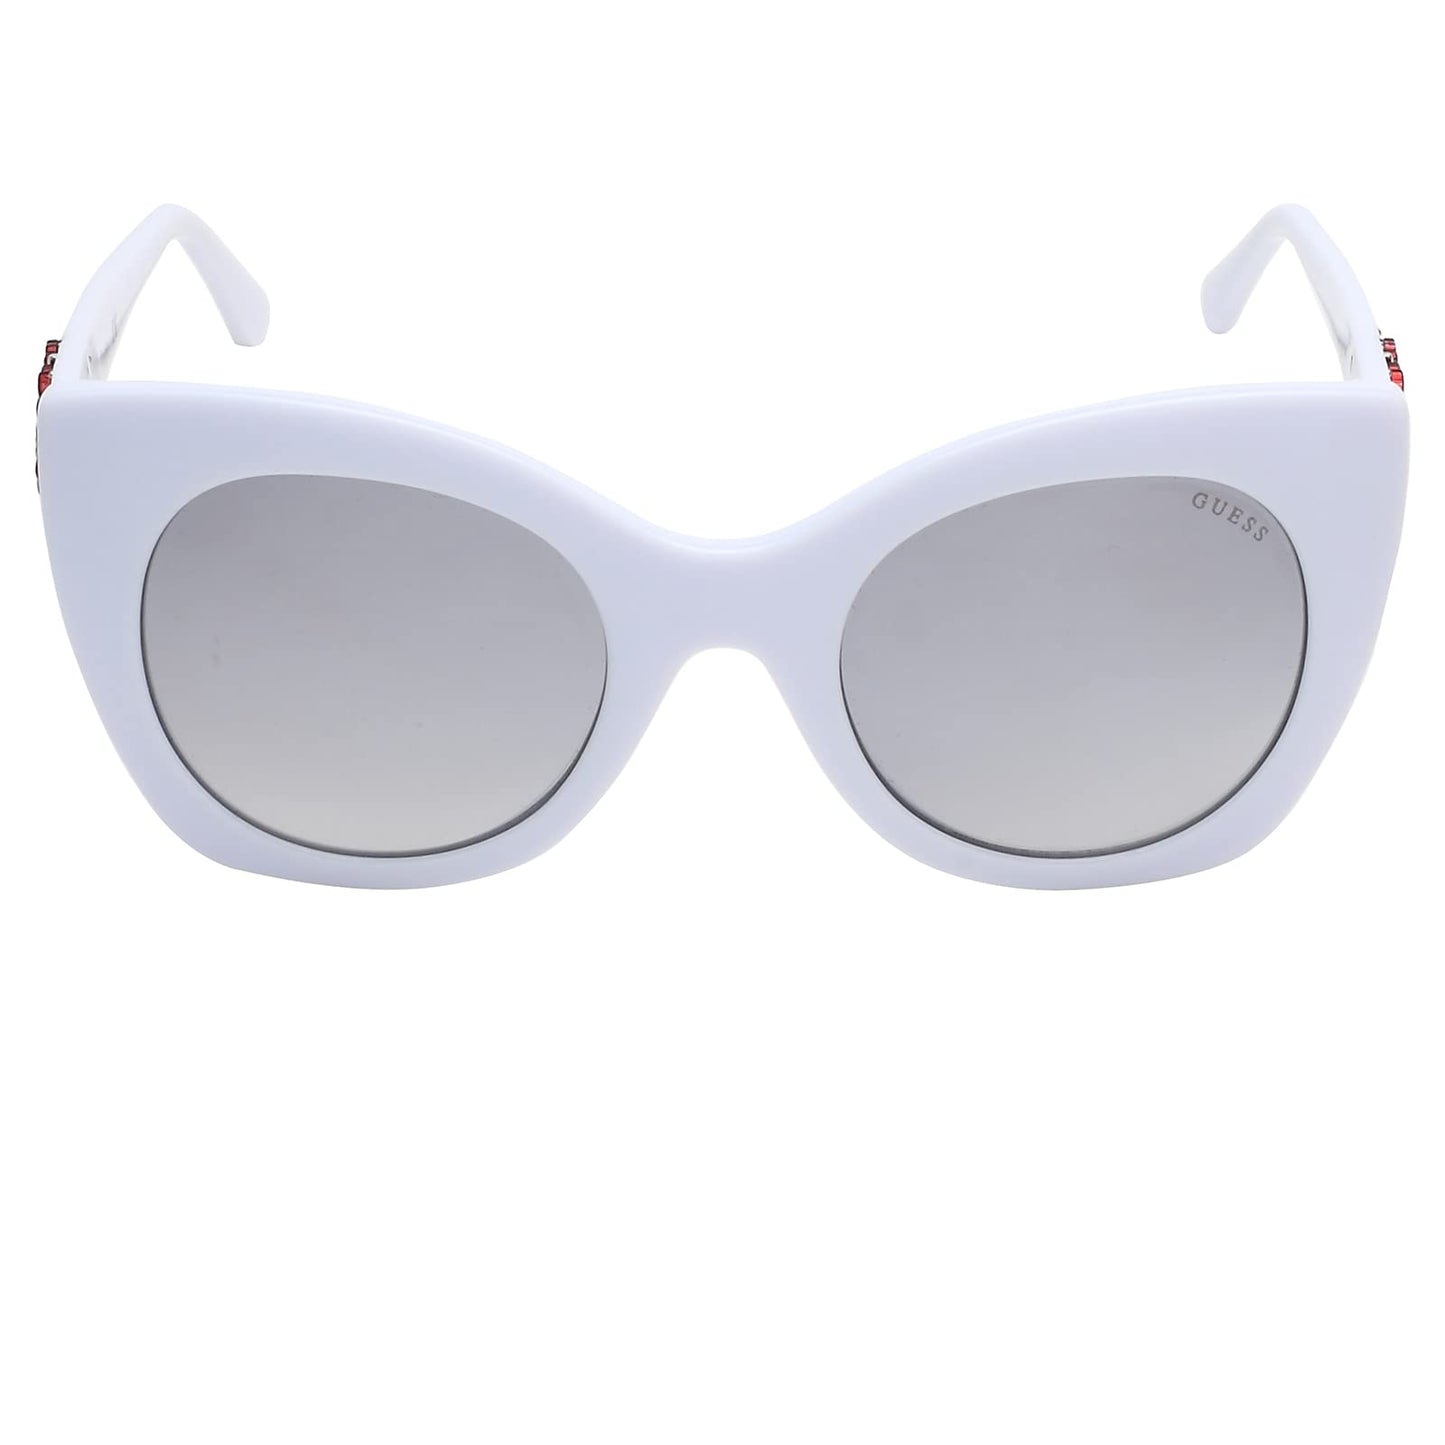 Guess Mirrored Butterfly Women Sunglasses - (GU7610 21C 51 S |51| Grey Color Lens)